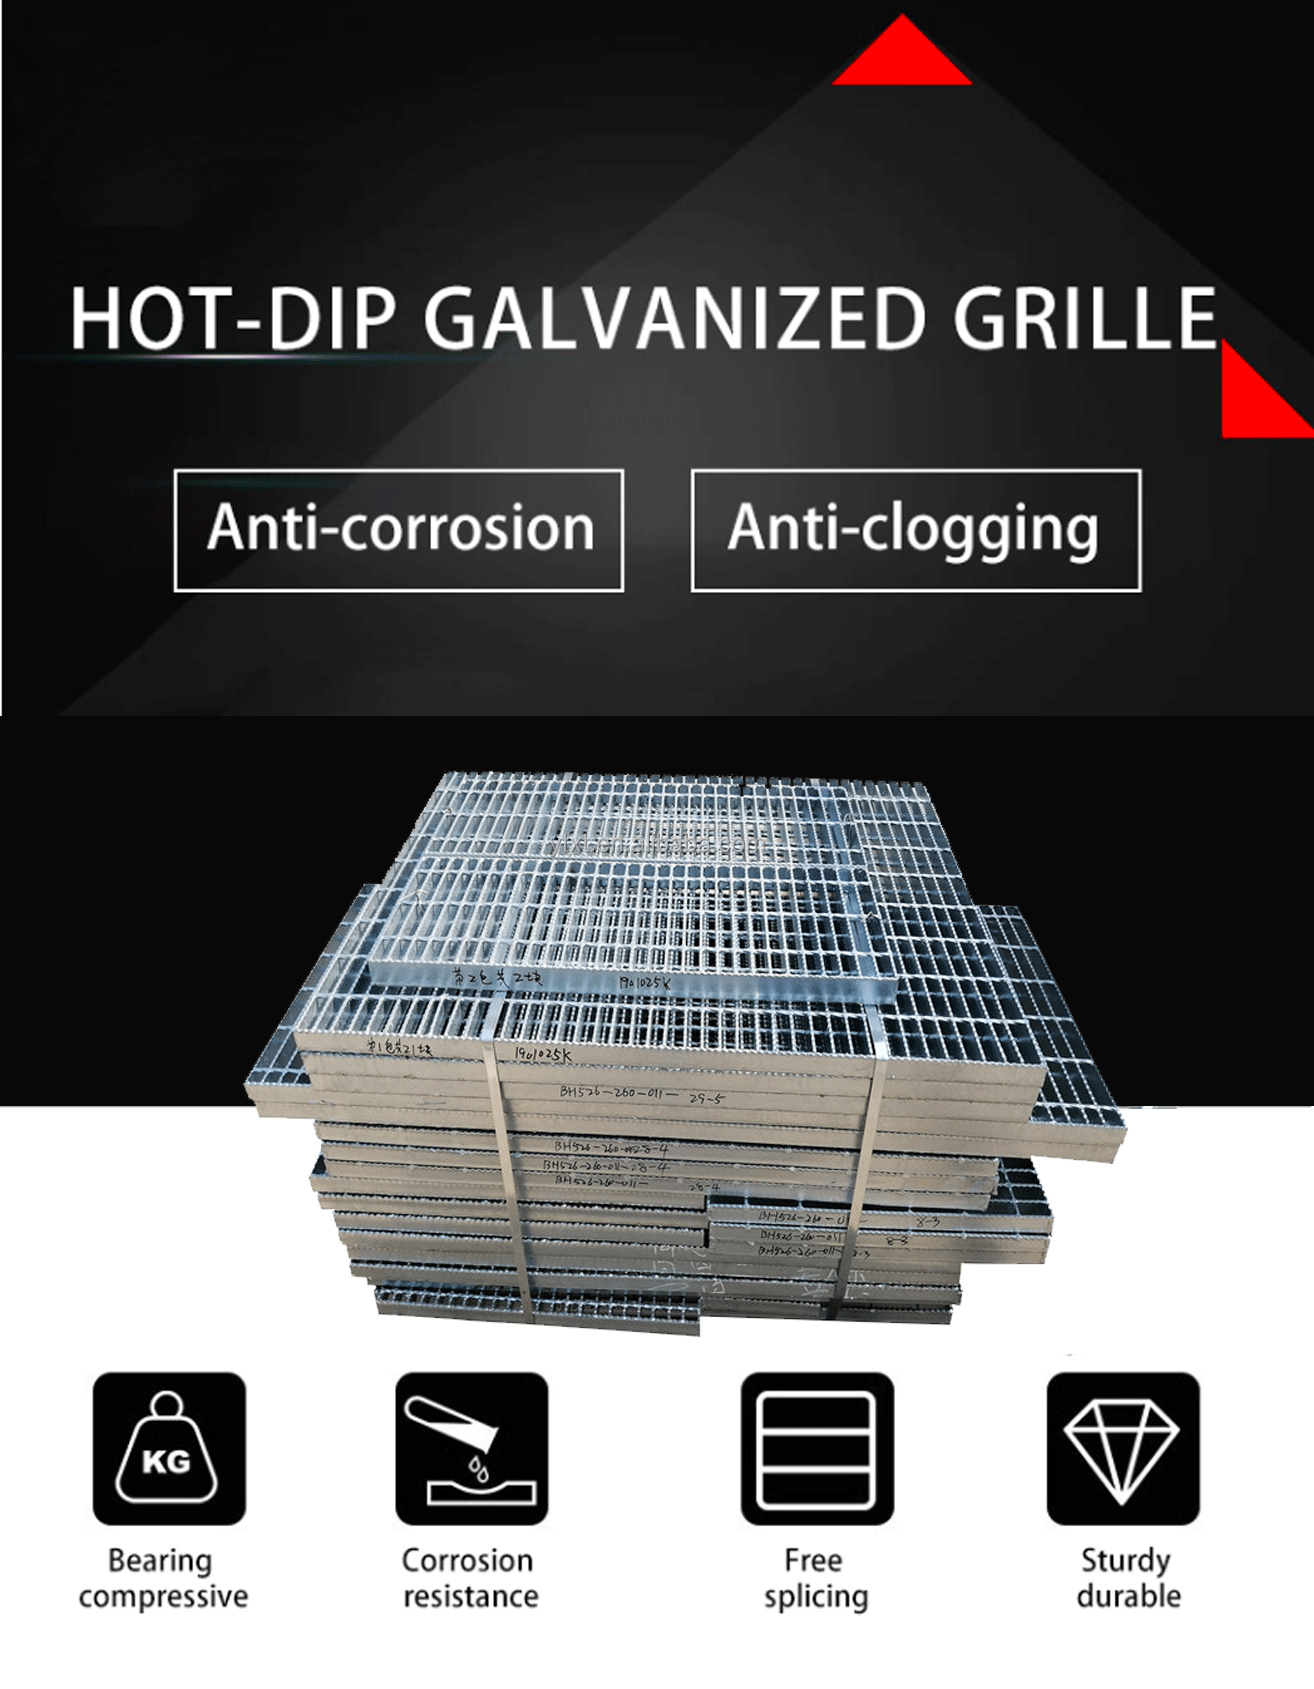 Standard prices weight serrated style stainless galvanized steel gi grating